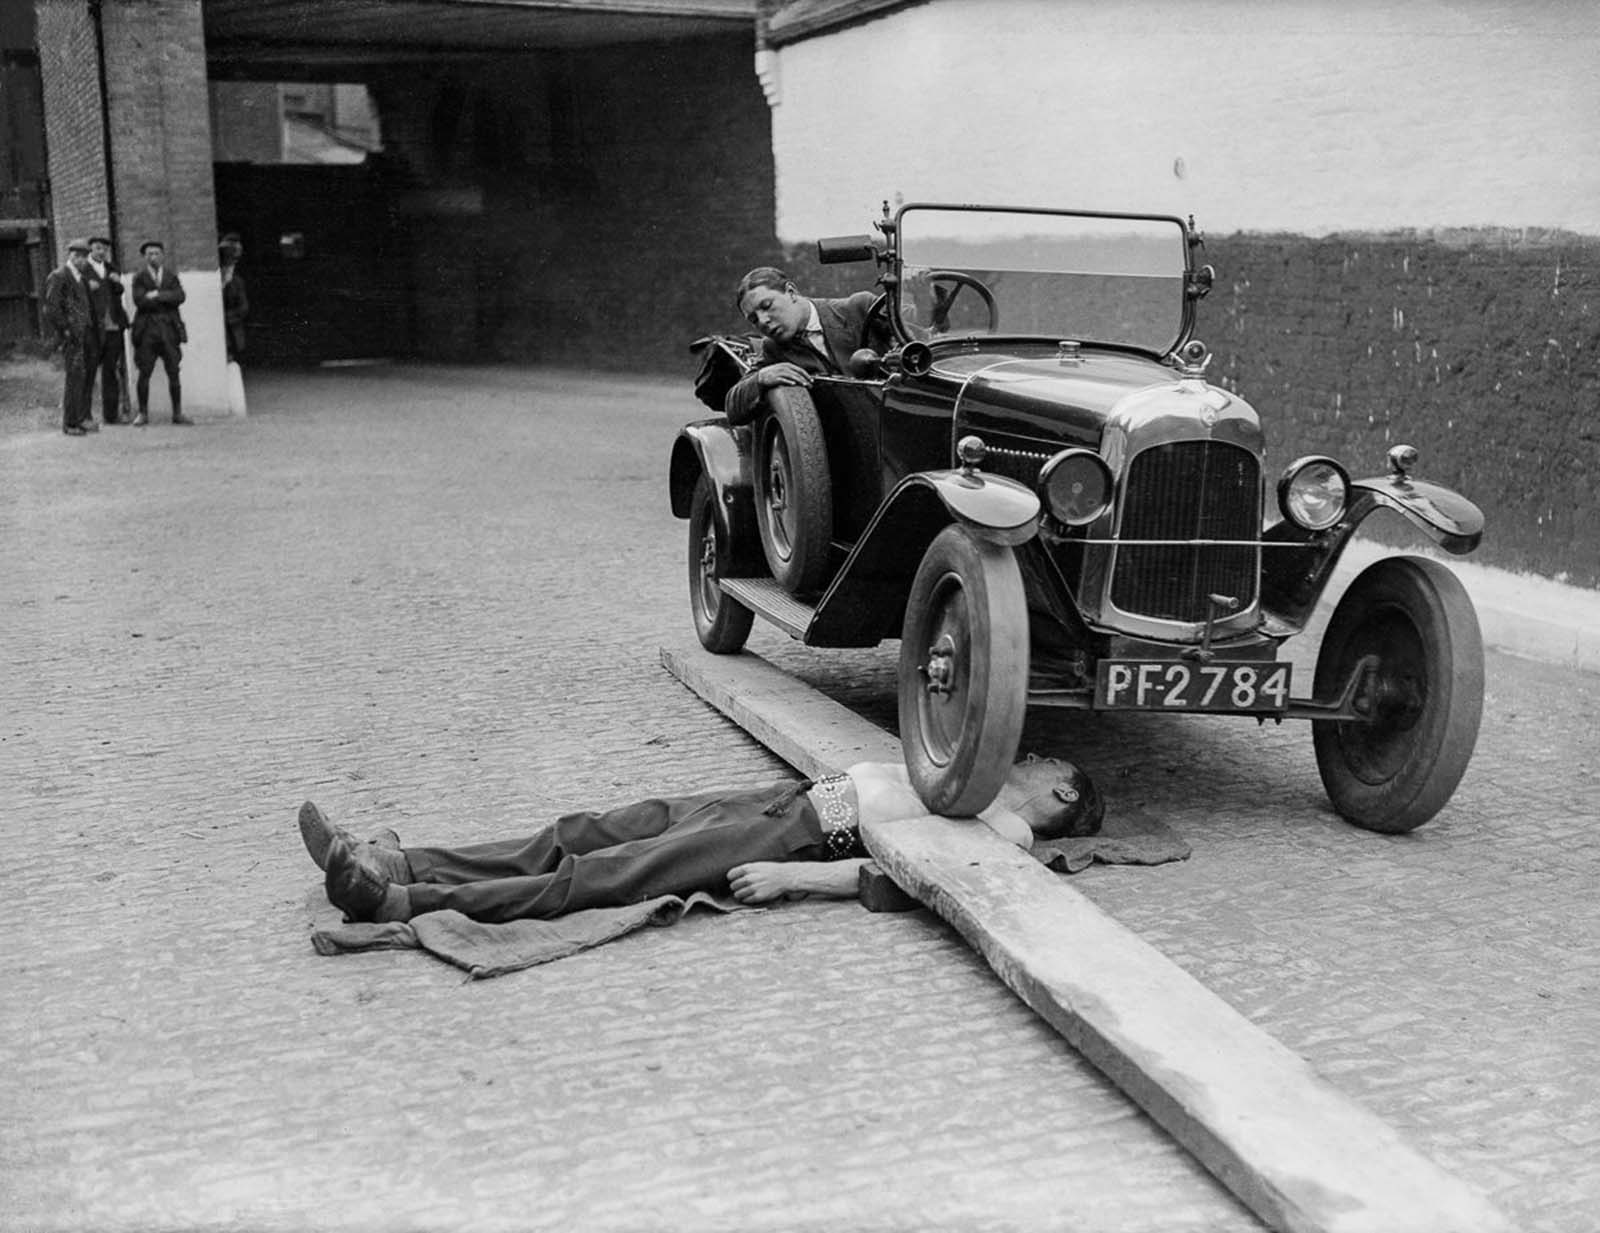 J. Rolleano bears the weight of a Citroen car running over his chest, 1932.